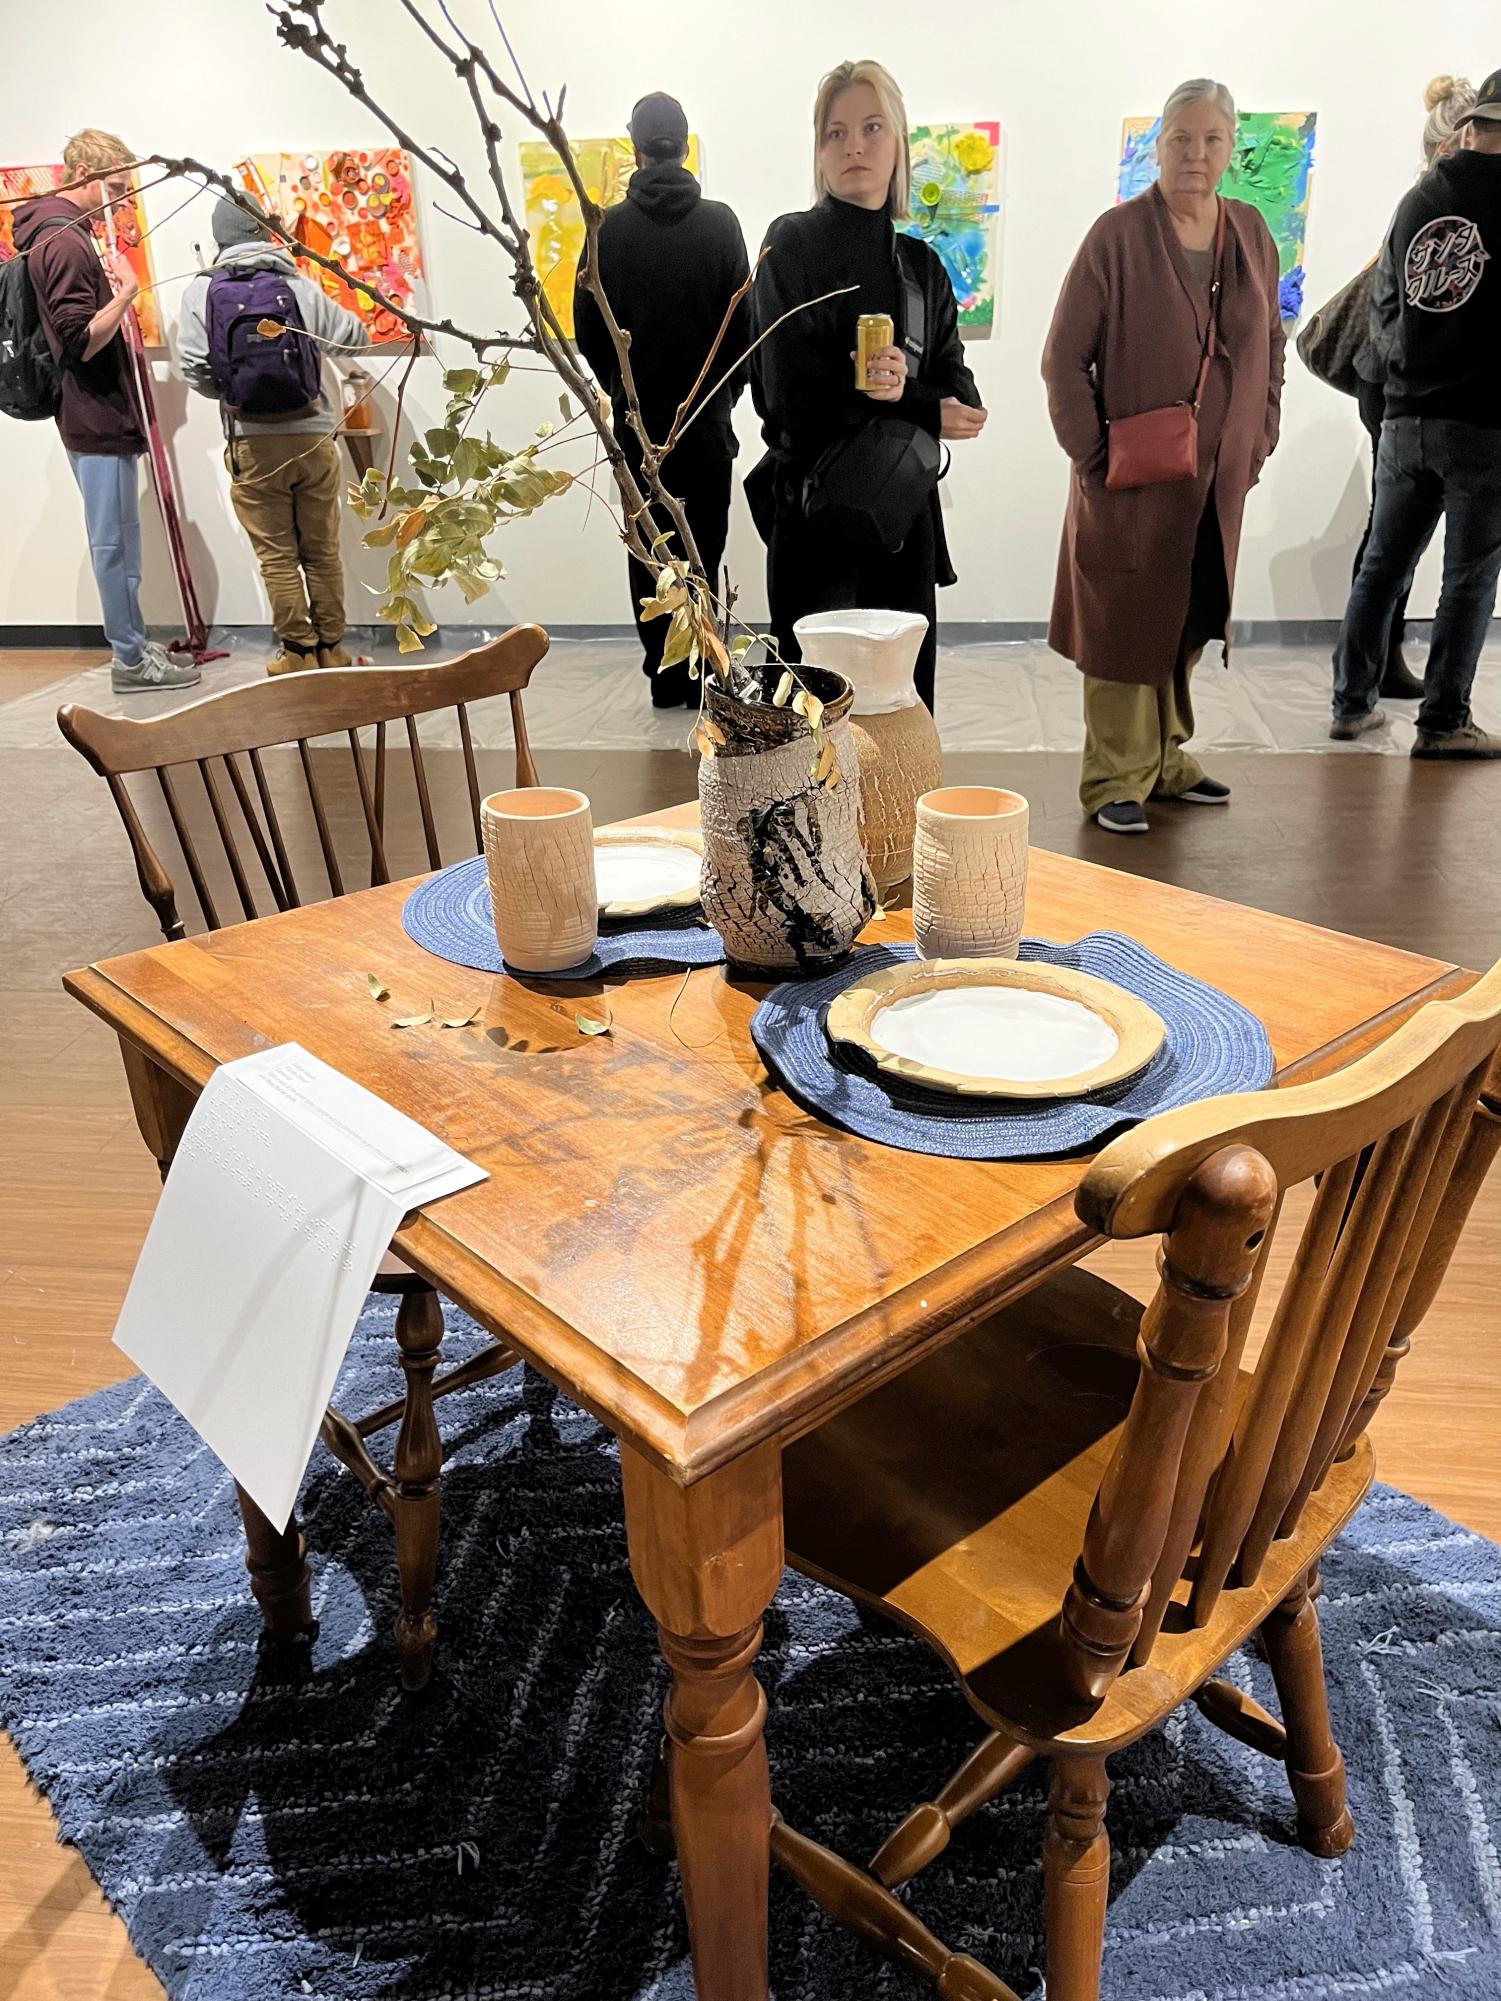 Ceramics piece titled Family Dinner by Nathan Brown. Brown encorages viewers to sit at the dinner table and engage with the dinnerware as you discover the cracks and flaws that we share.